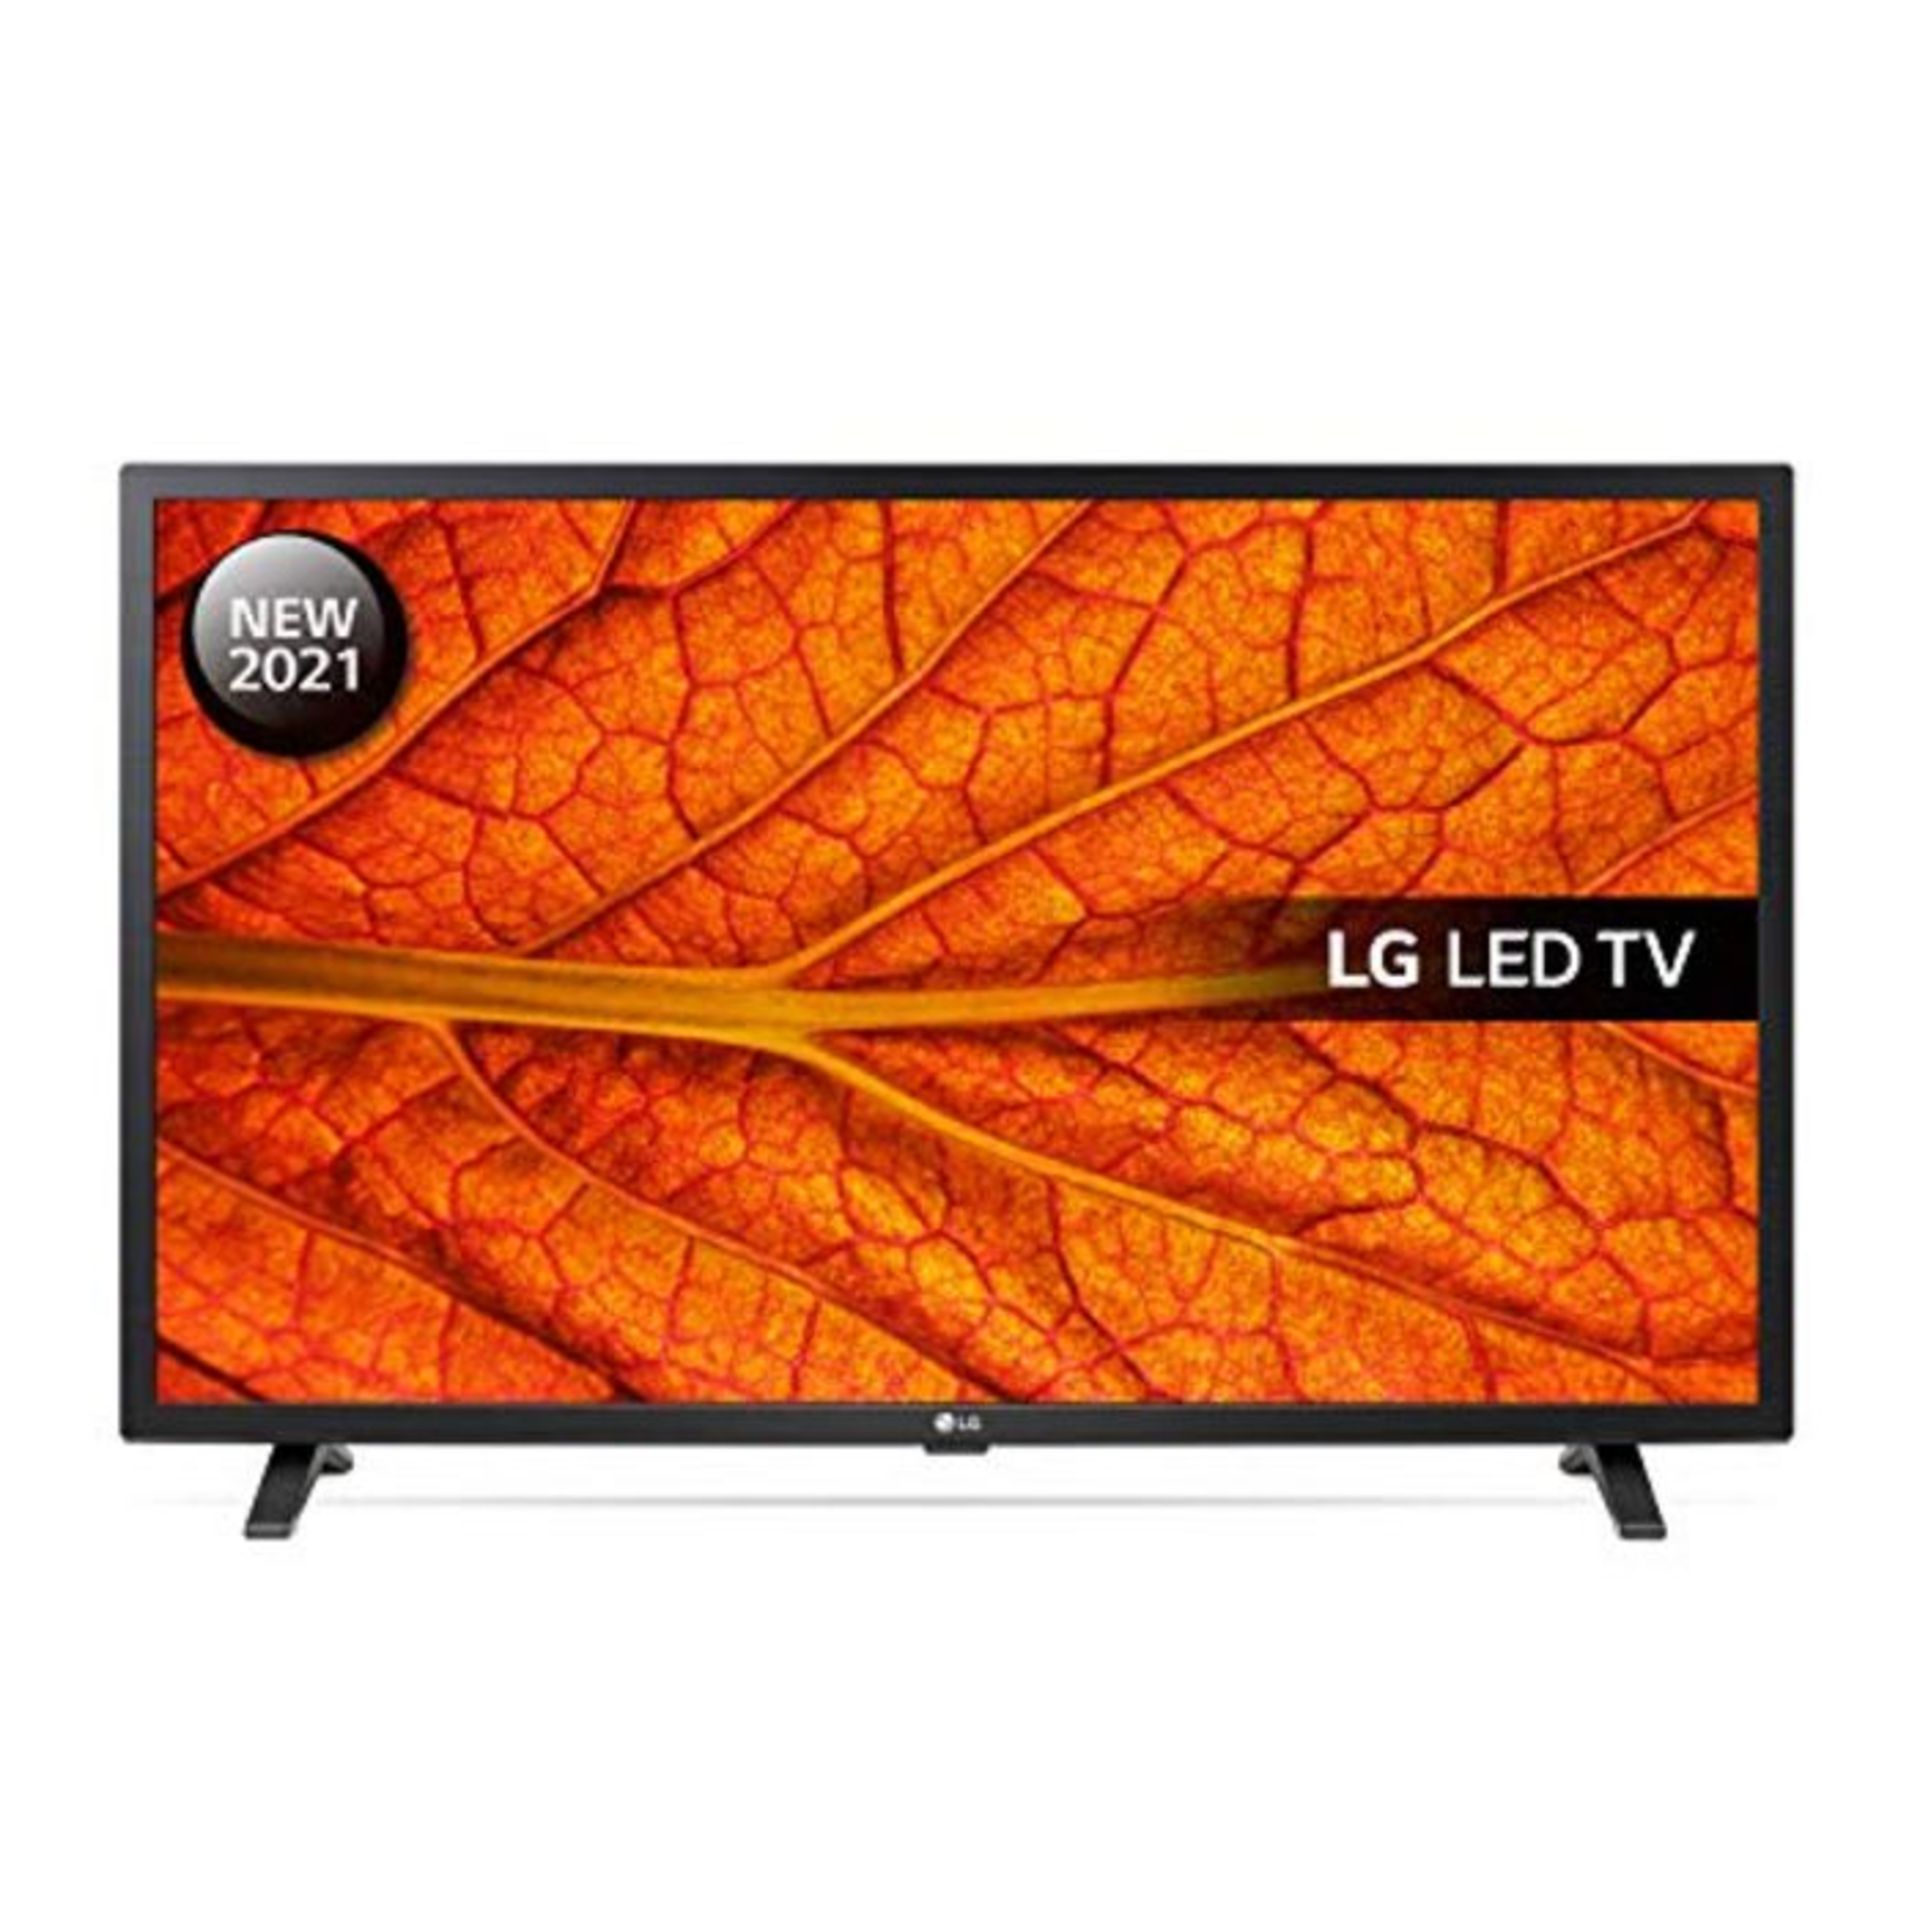 RRP £231.00 [CRACKED] LG 32LM637BPLA 32 inch HD HDR Smart LED TV, with Quad Core Processor, Active